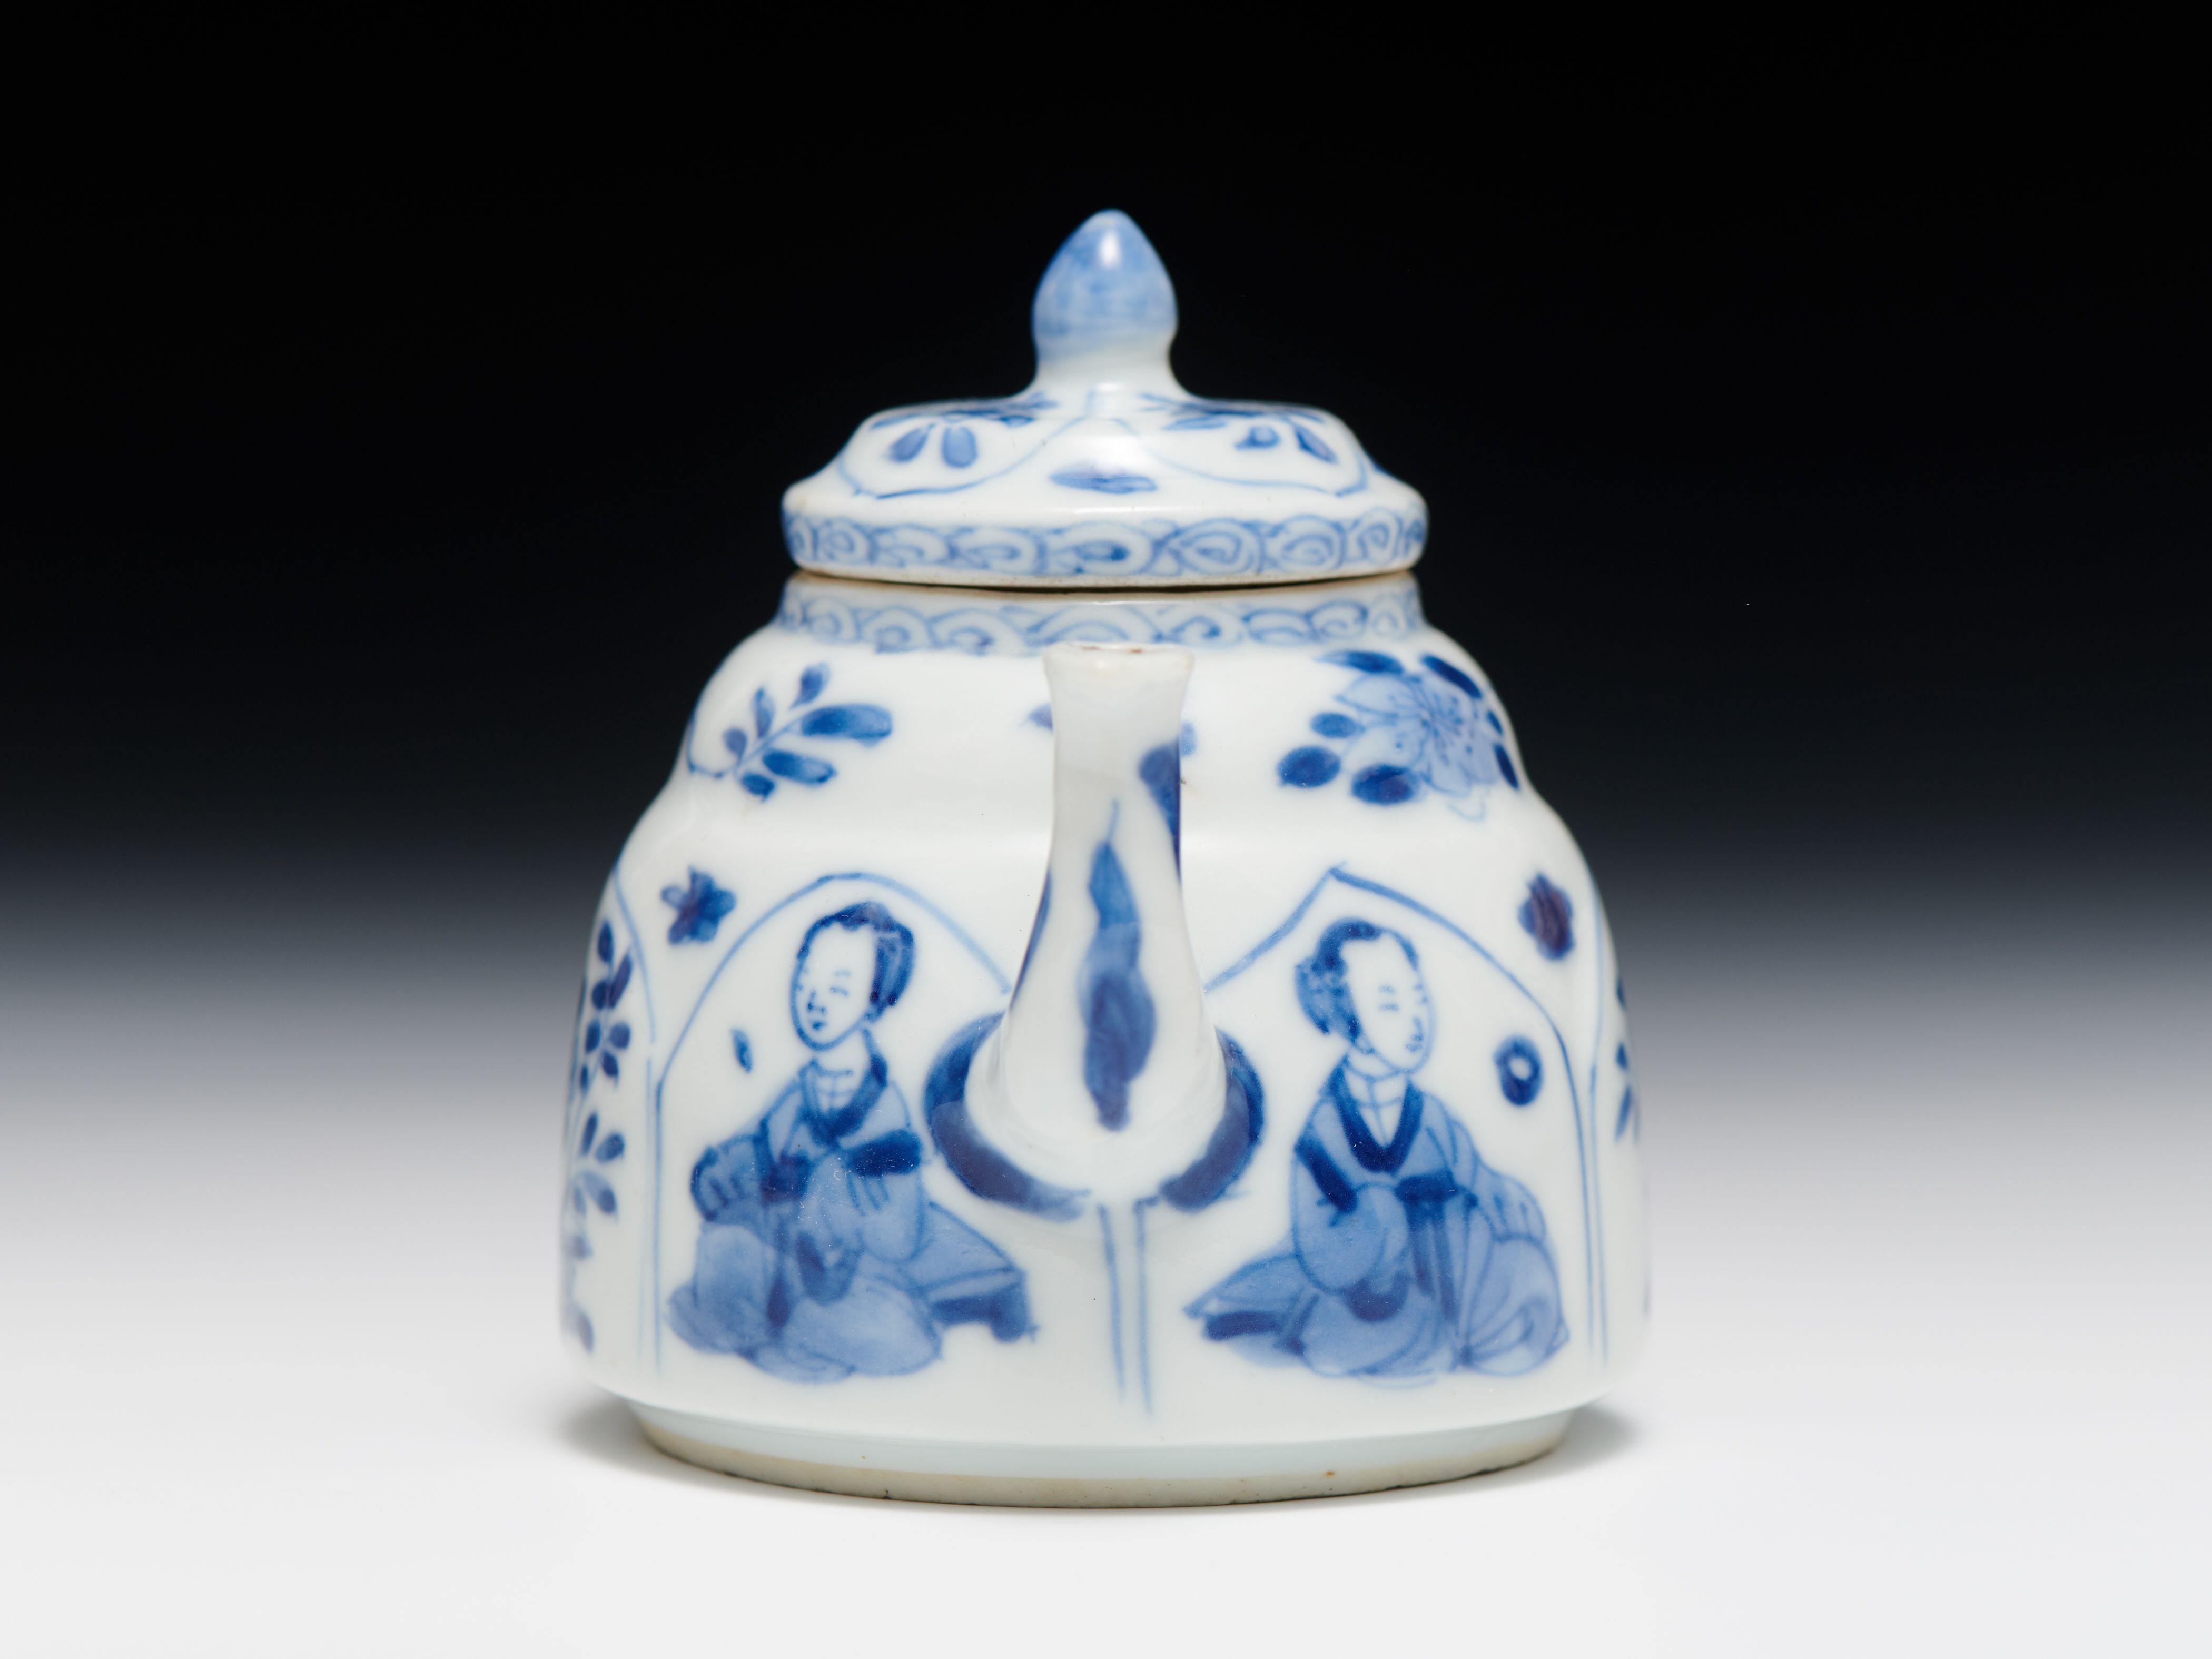 Chinese porcelain teapot decorated in under-glaze cobalt blue 